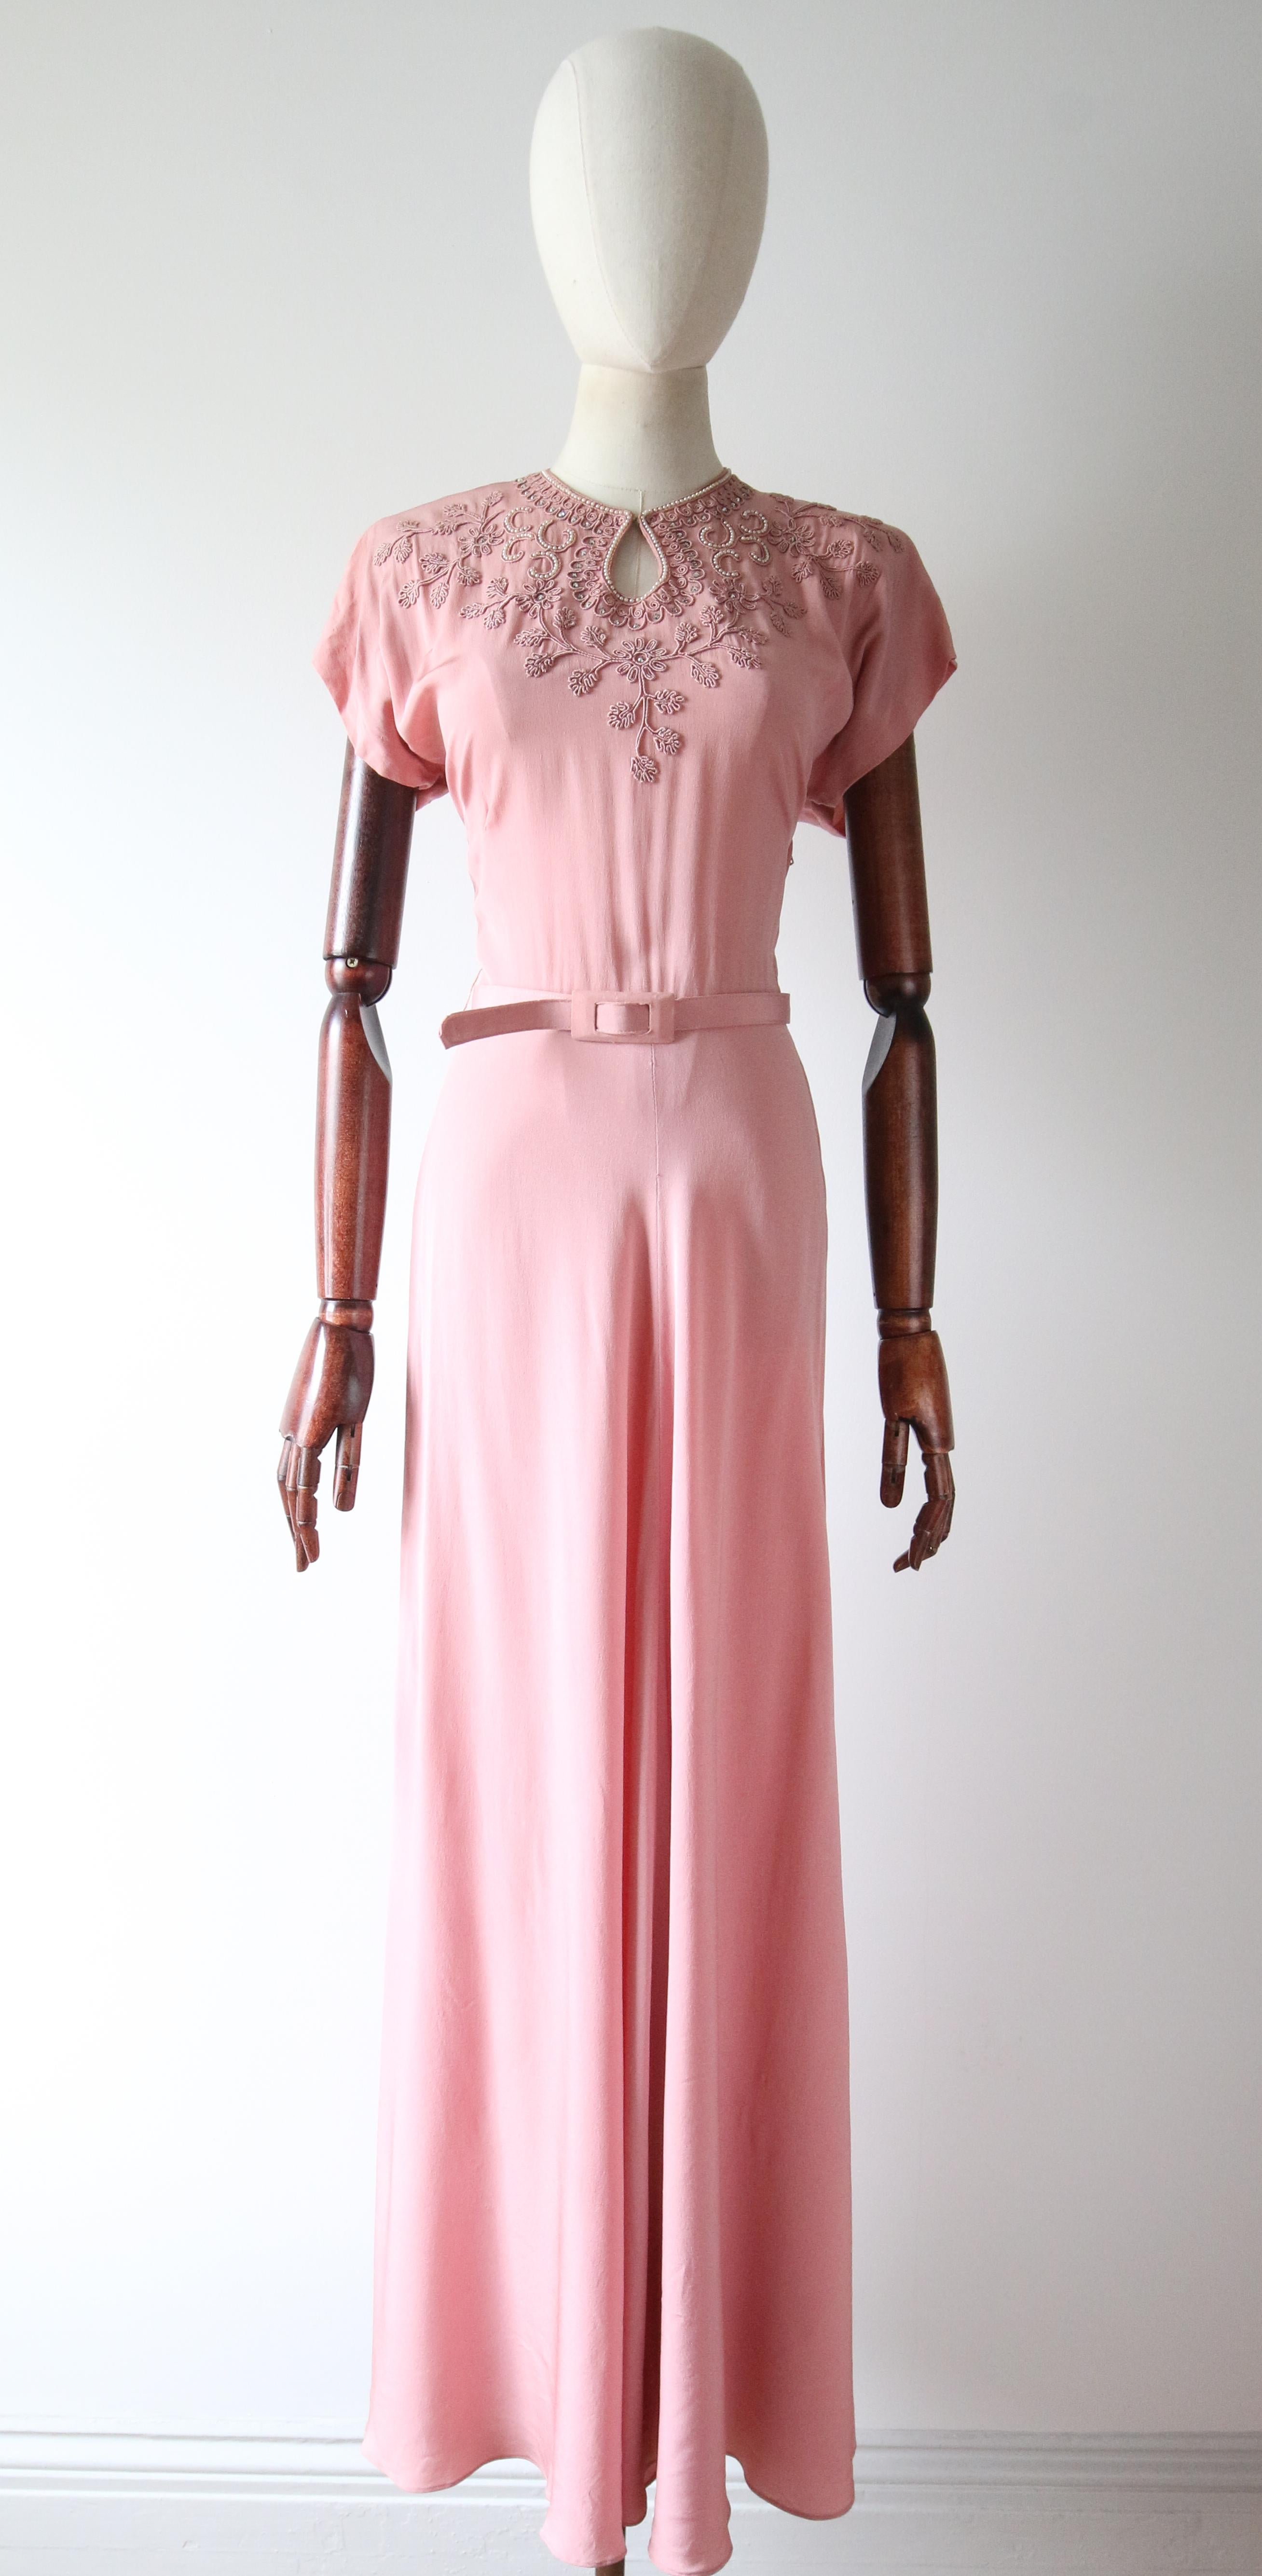 Vintage 1940's Pink Silk Evening Dress Beaded Pearl Floral Dress UK 8 Us 4 In Good Condition For Sale In Cheltenham, GB